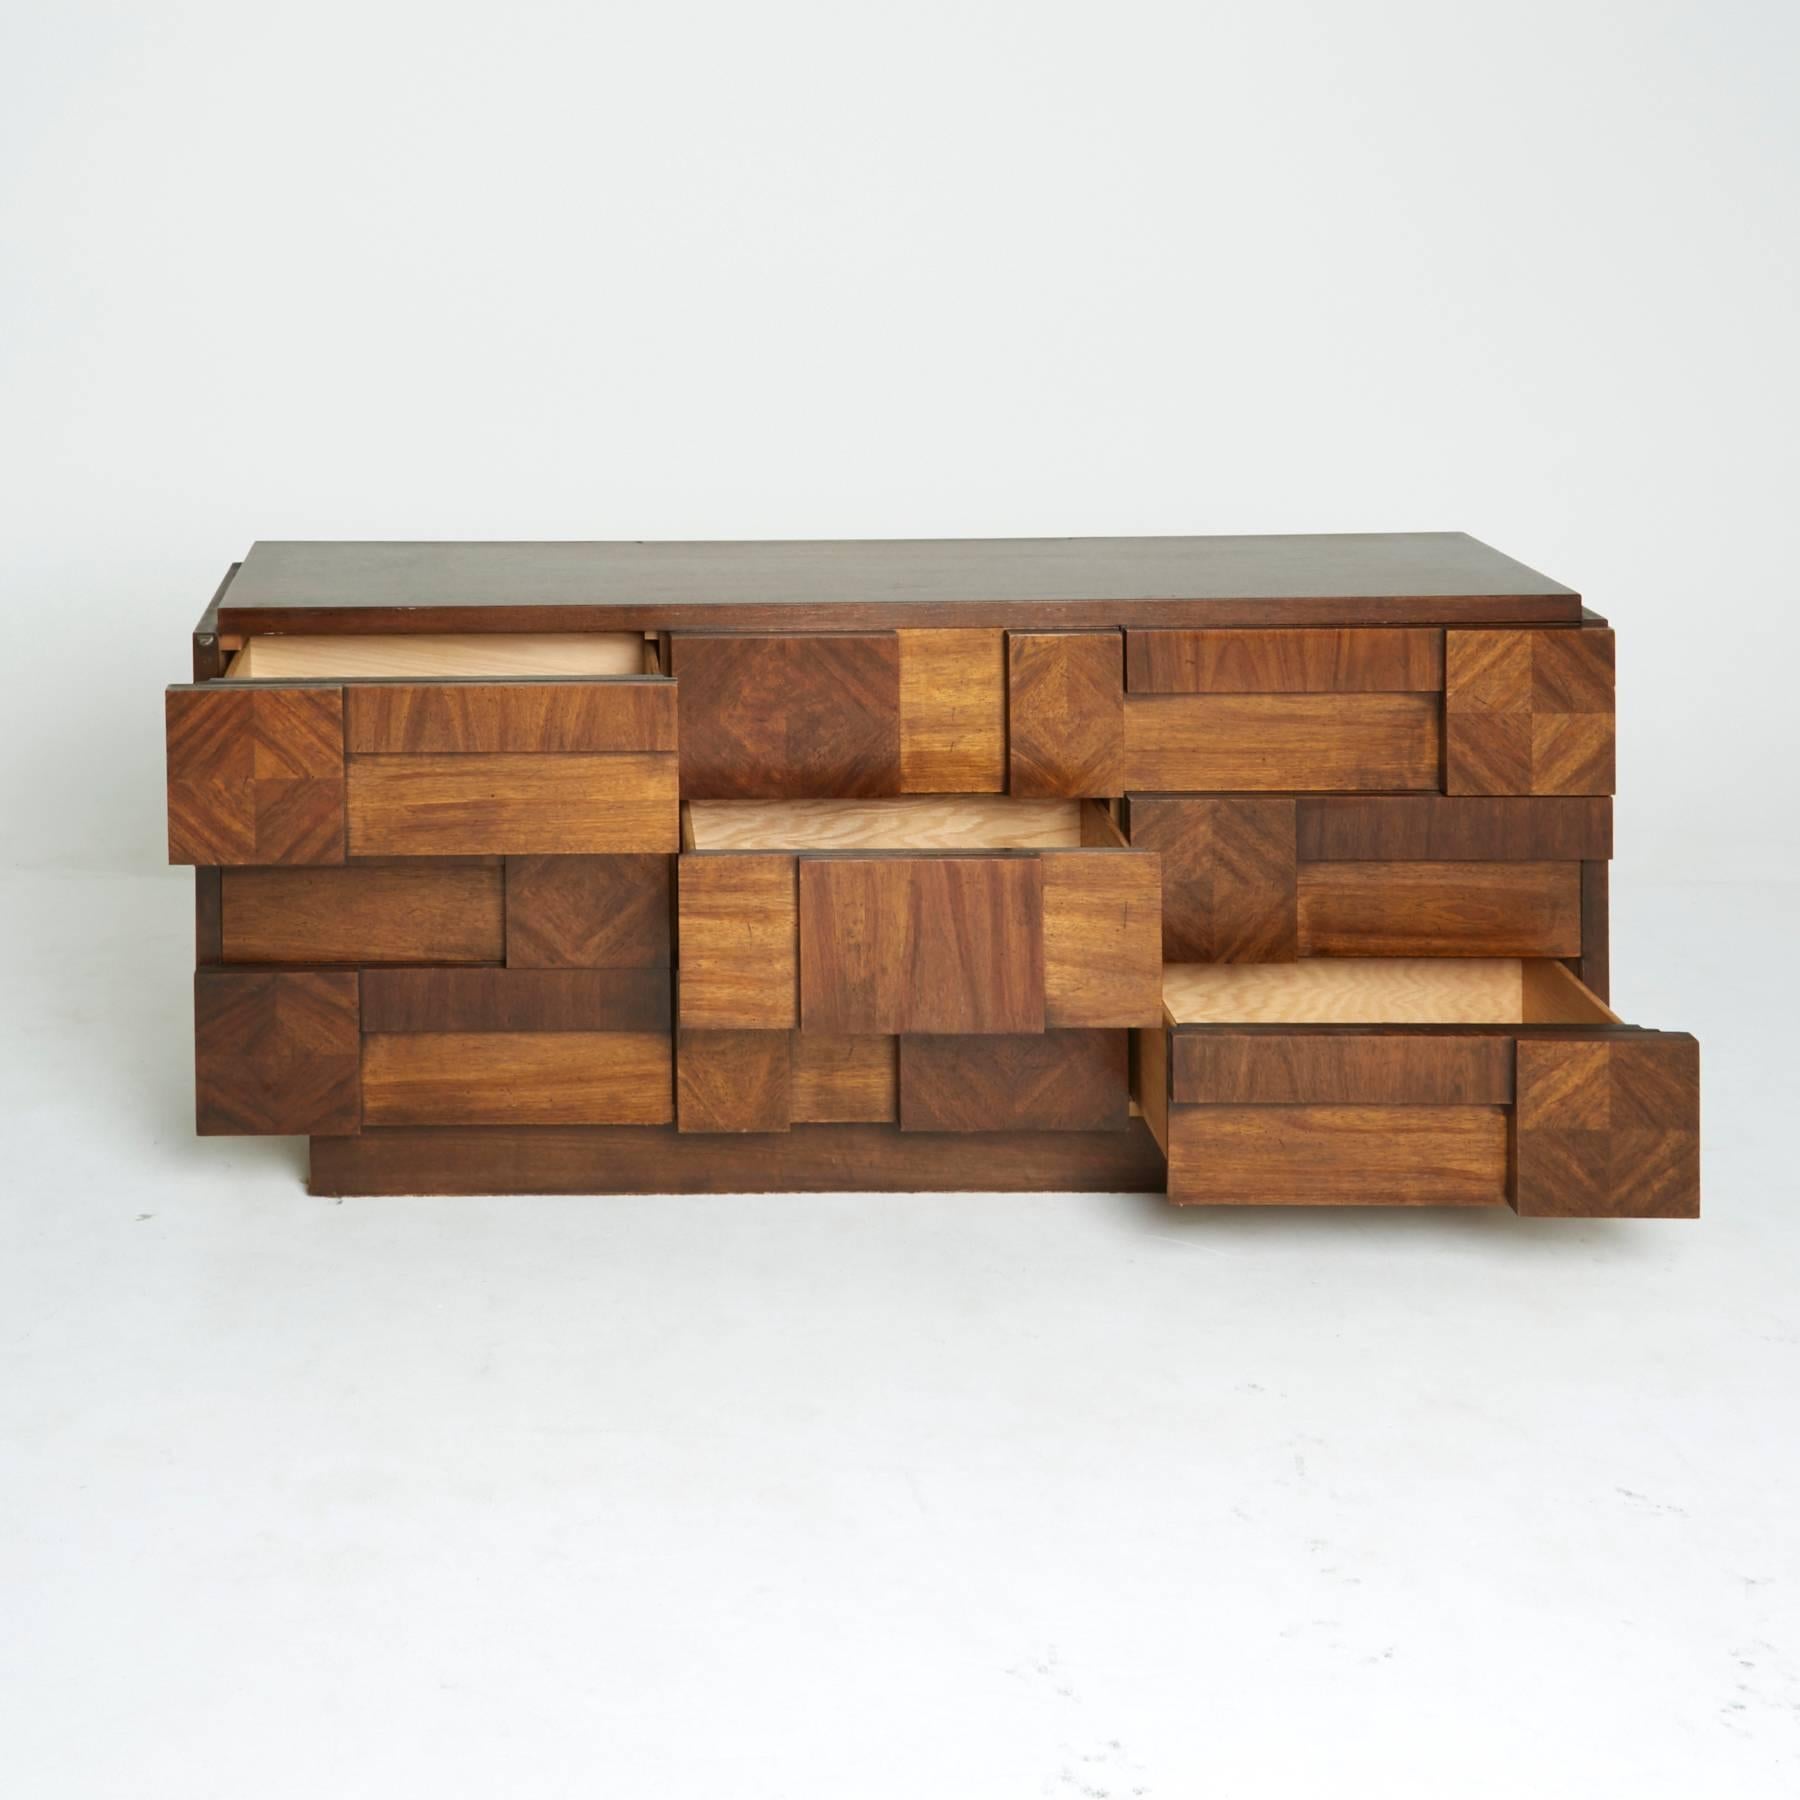 This Brutalist credenza, created by Lane, features a cubist style wood arrangement across the front of the nine dresser drawers. Each of the blocks of wood has a rich and unique grain, each going a different direction to create a collage of